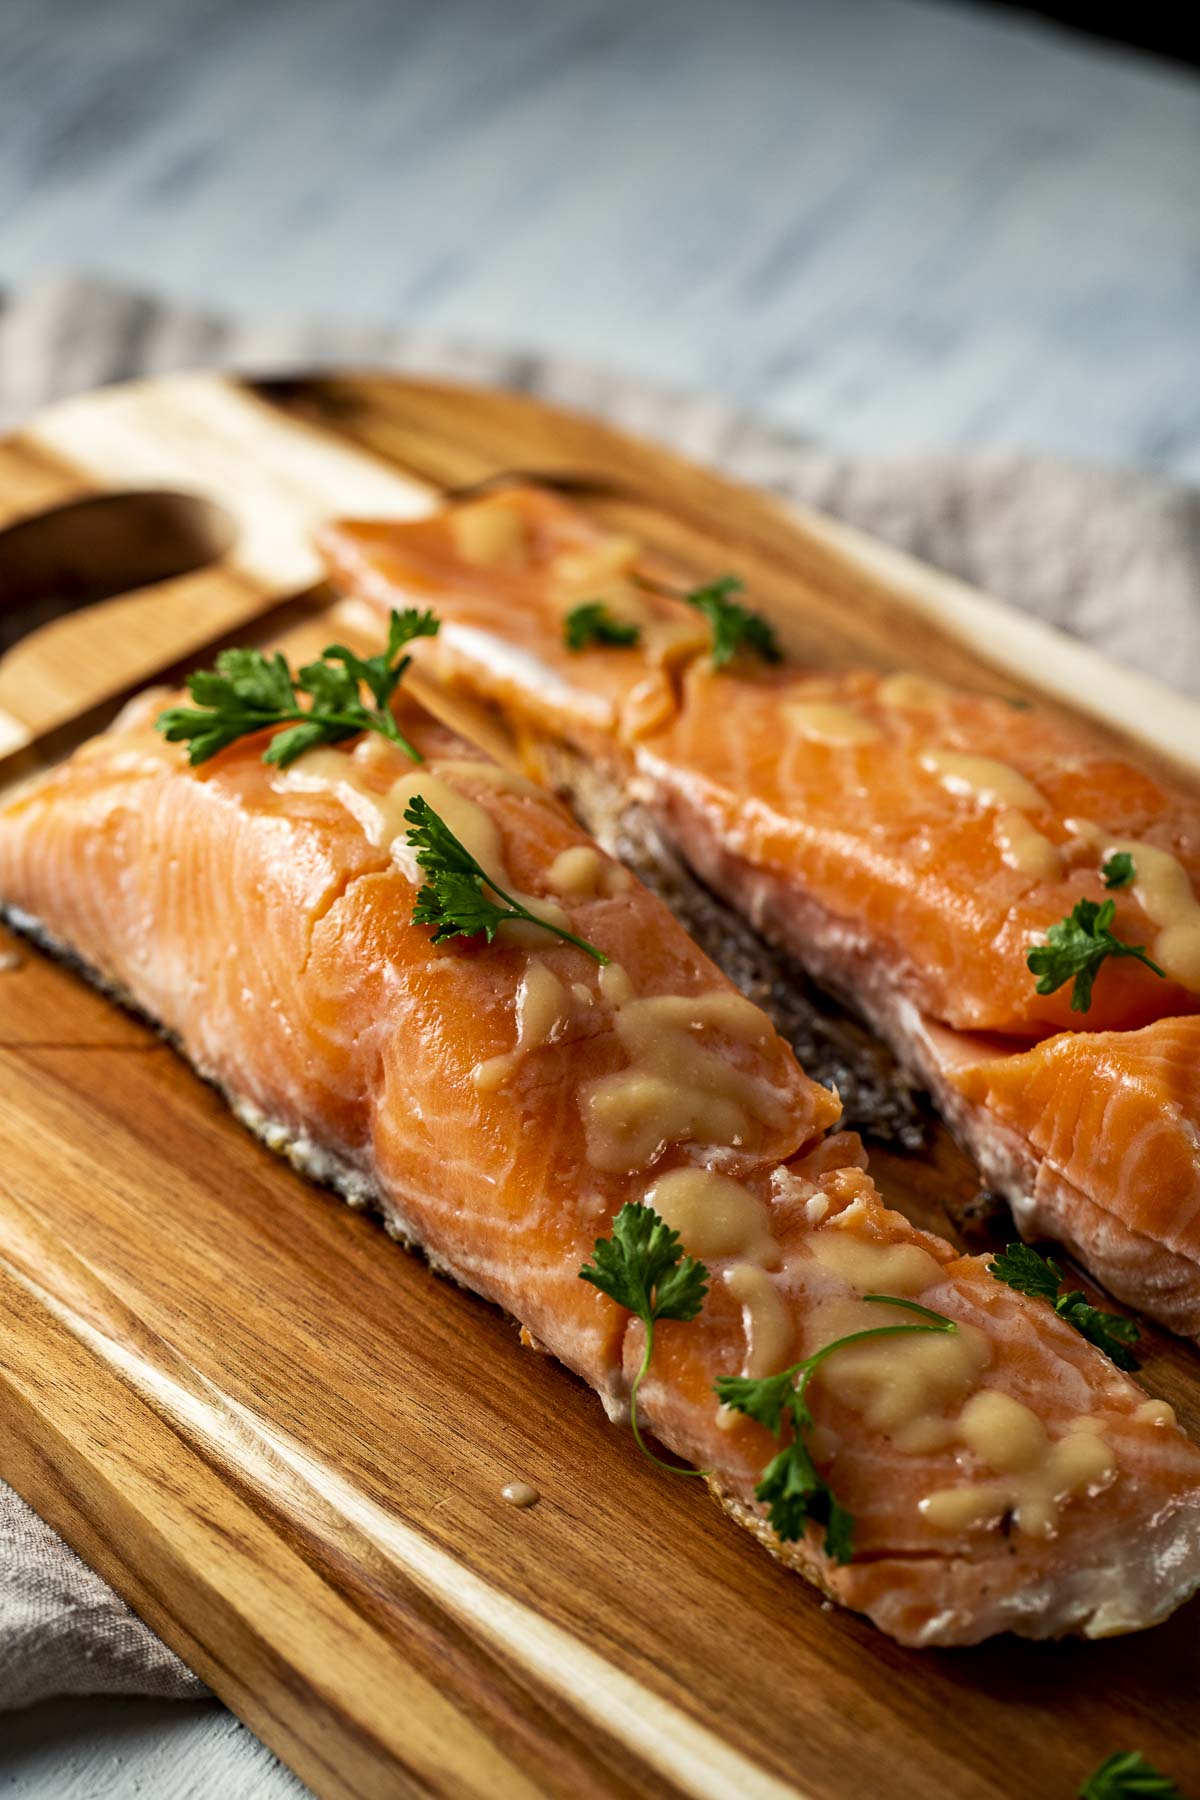 Two sous vide salmon portions on a wooden serving board.